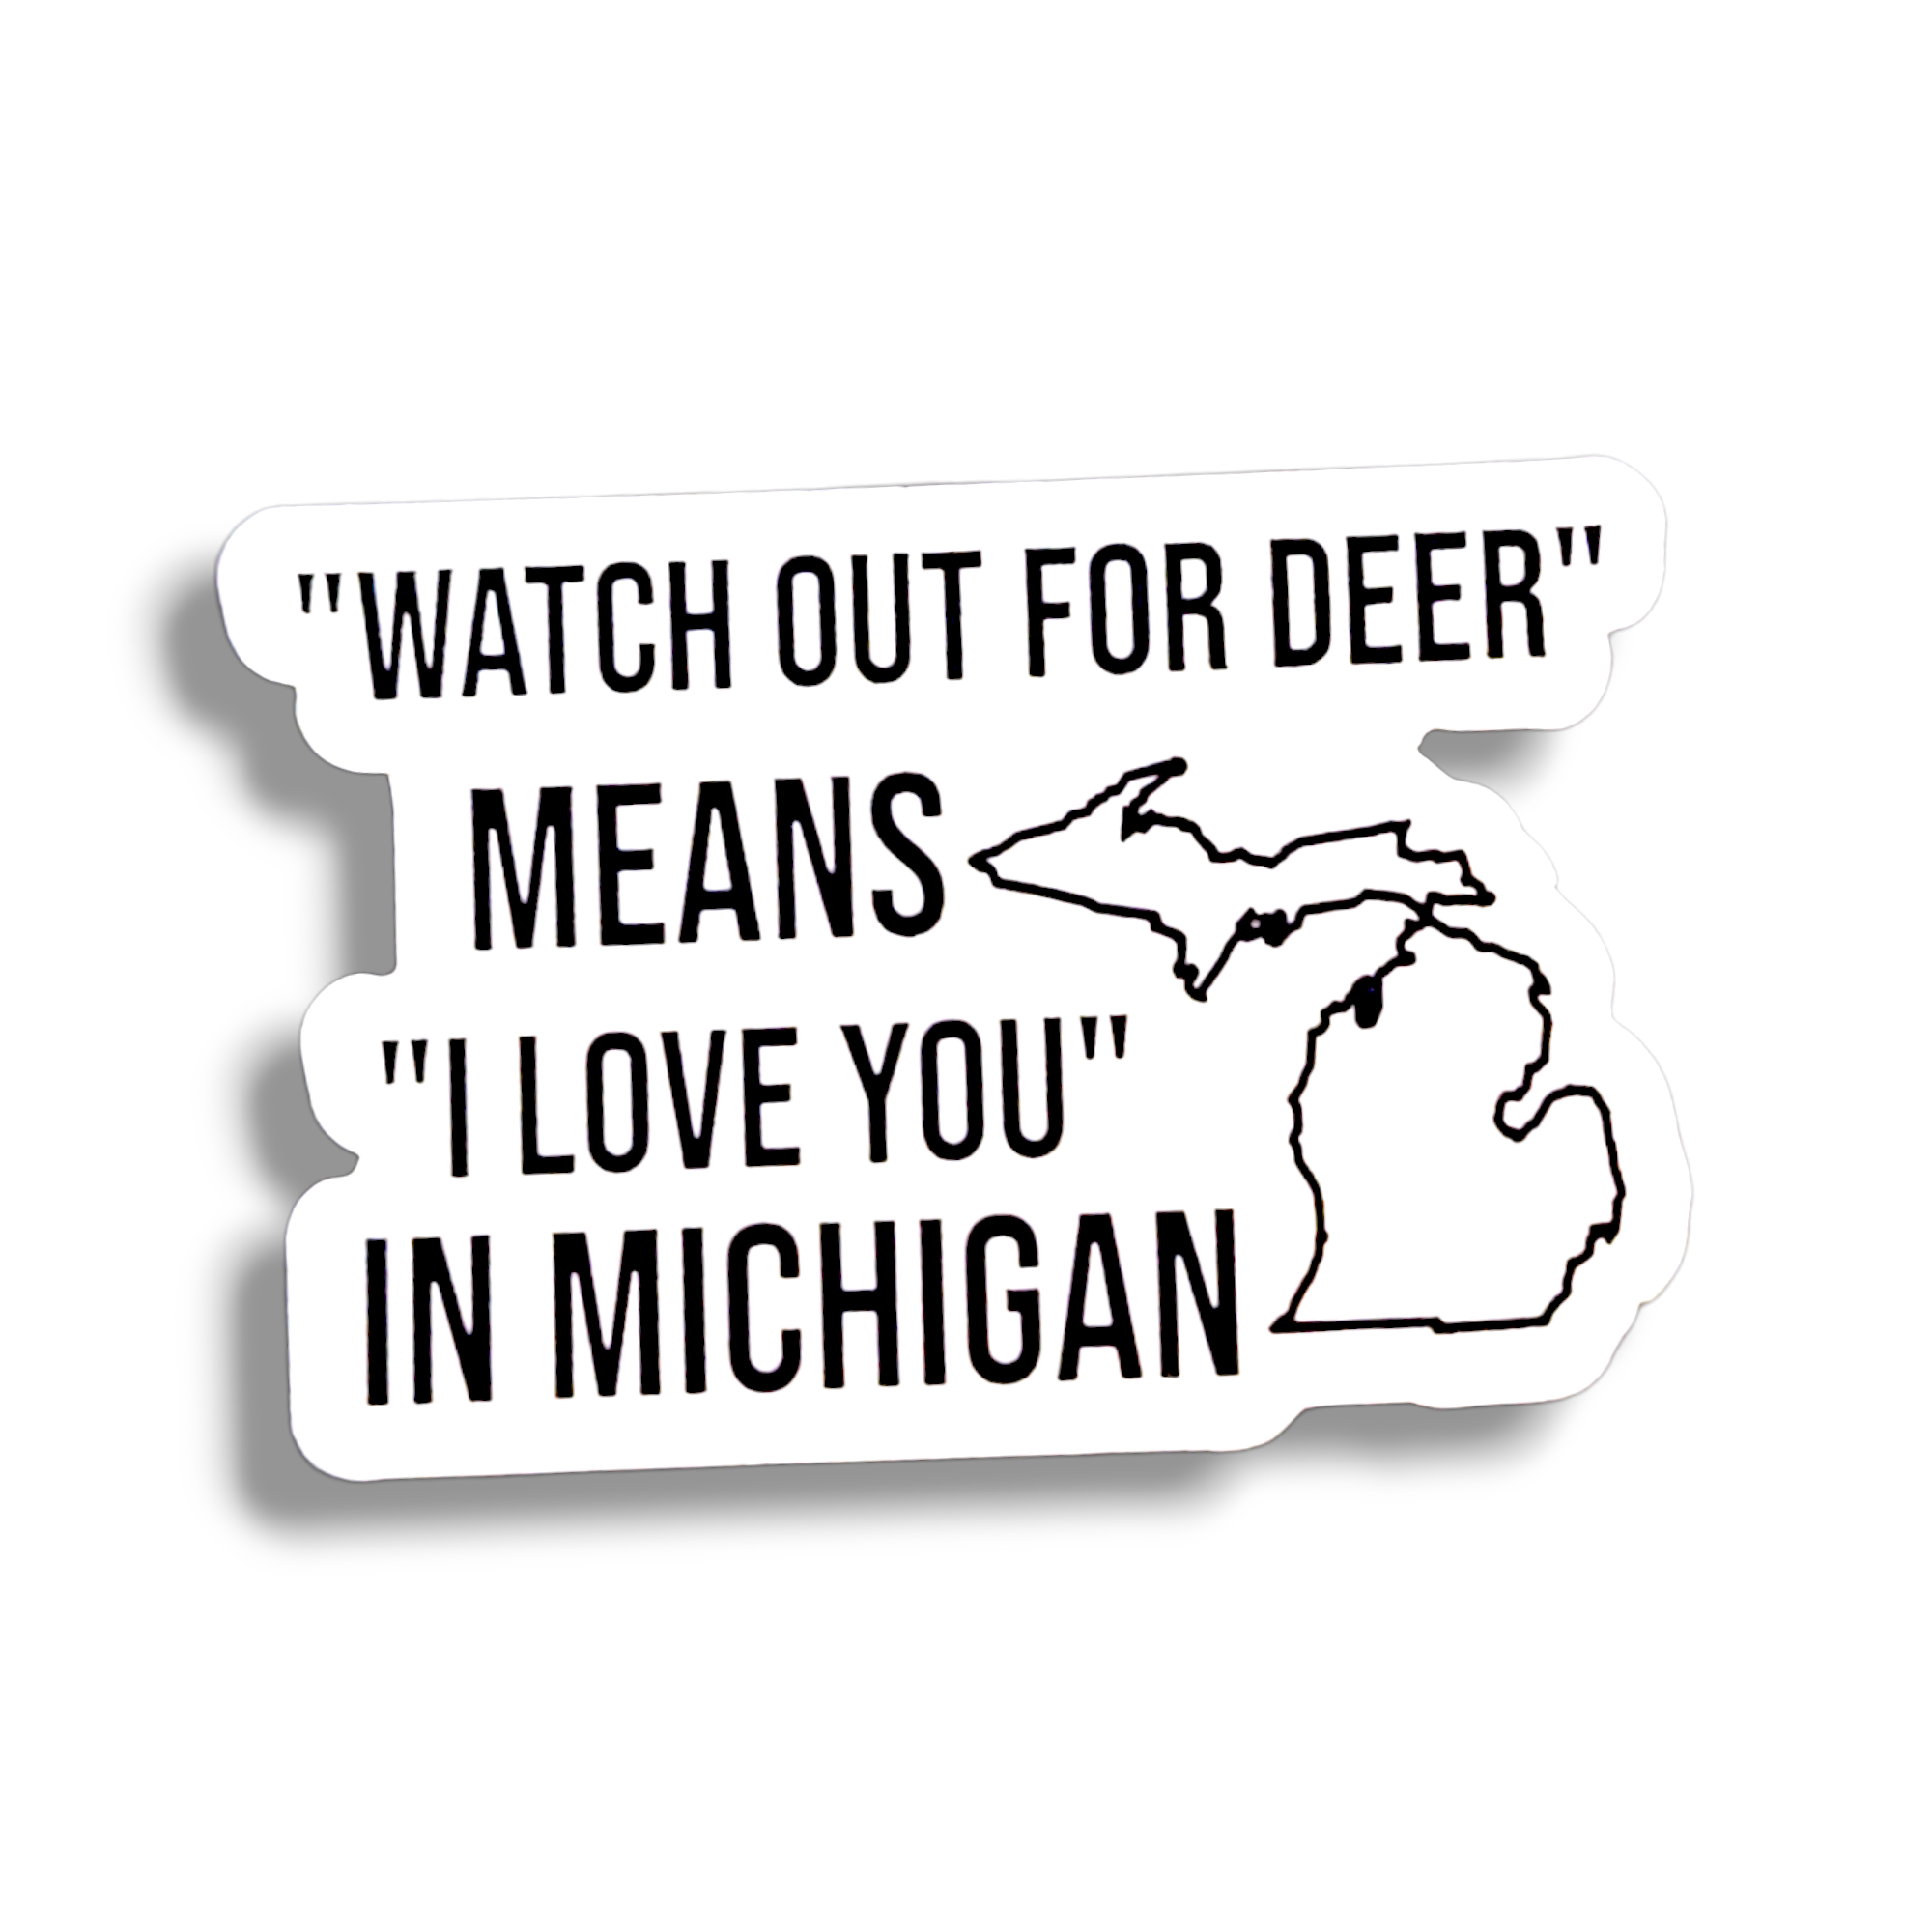 "Watch out for deer means I love you in Michigan" - Magnet - small - Travelers Trade Post